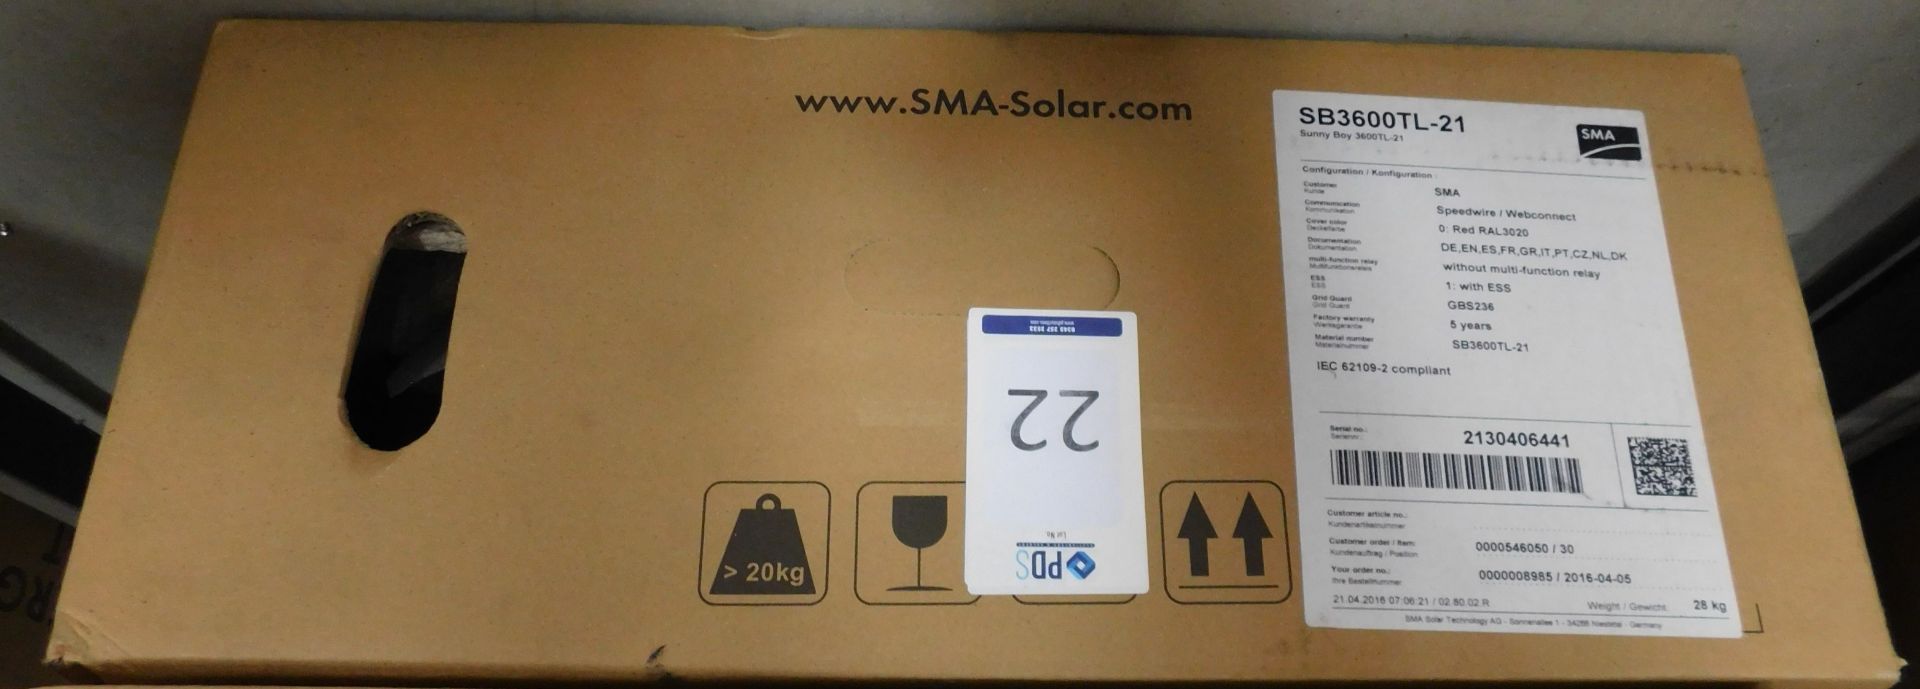 SMA “Sunny Boy” SB3600TL-21 Solar Inverter (New & Boxed) (Location: Brentwood: Please Refer to